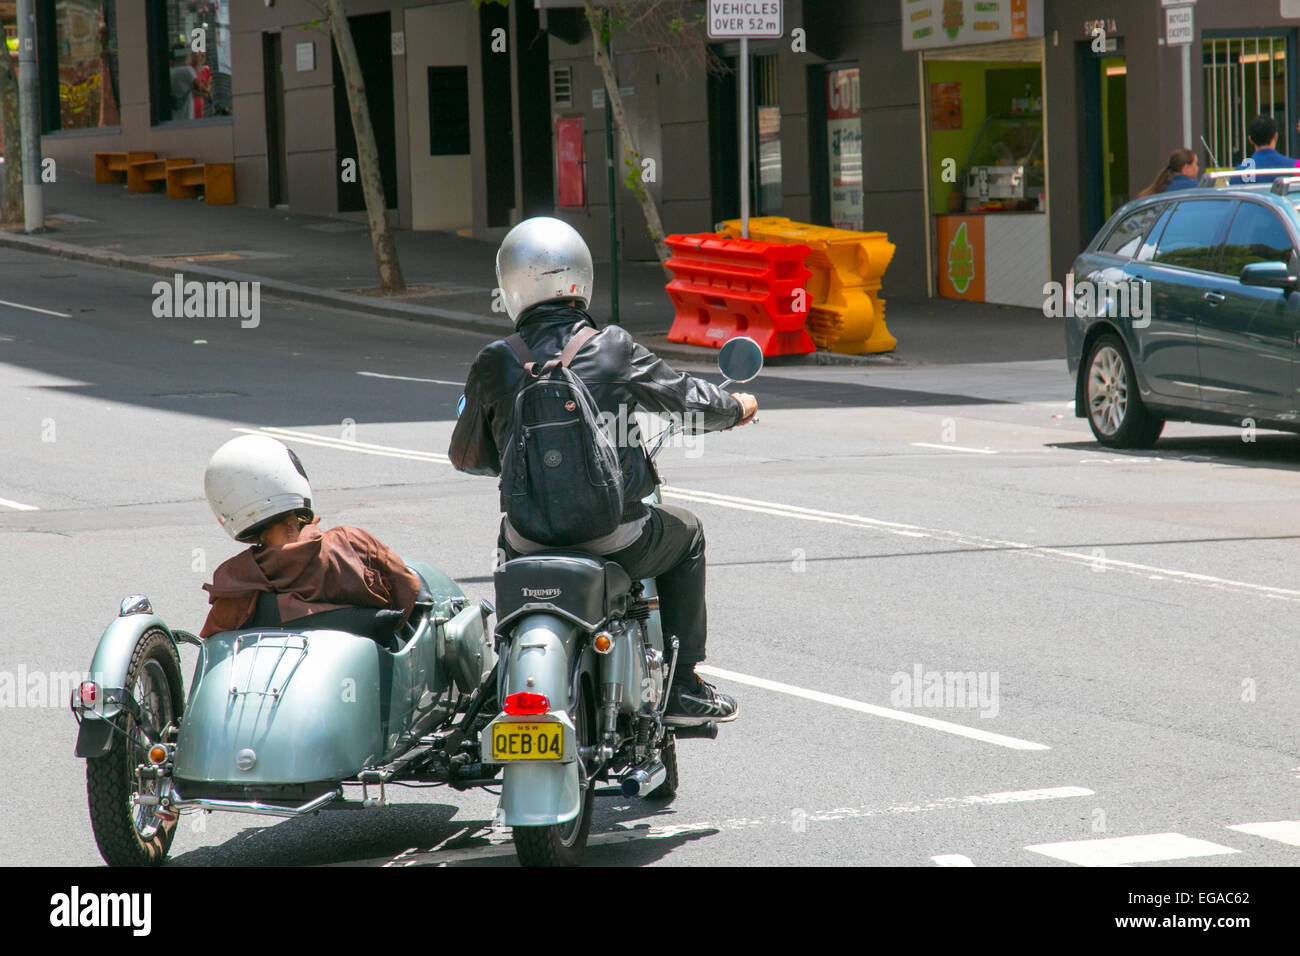 1974 silver Triumph Bonneville with sidecar, motorbike rider and passenger in Sydney city centre,NSW,Australia Stock Photo